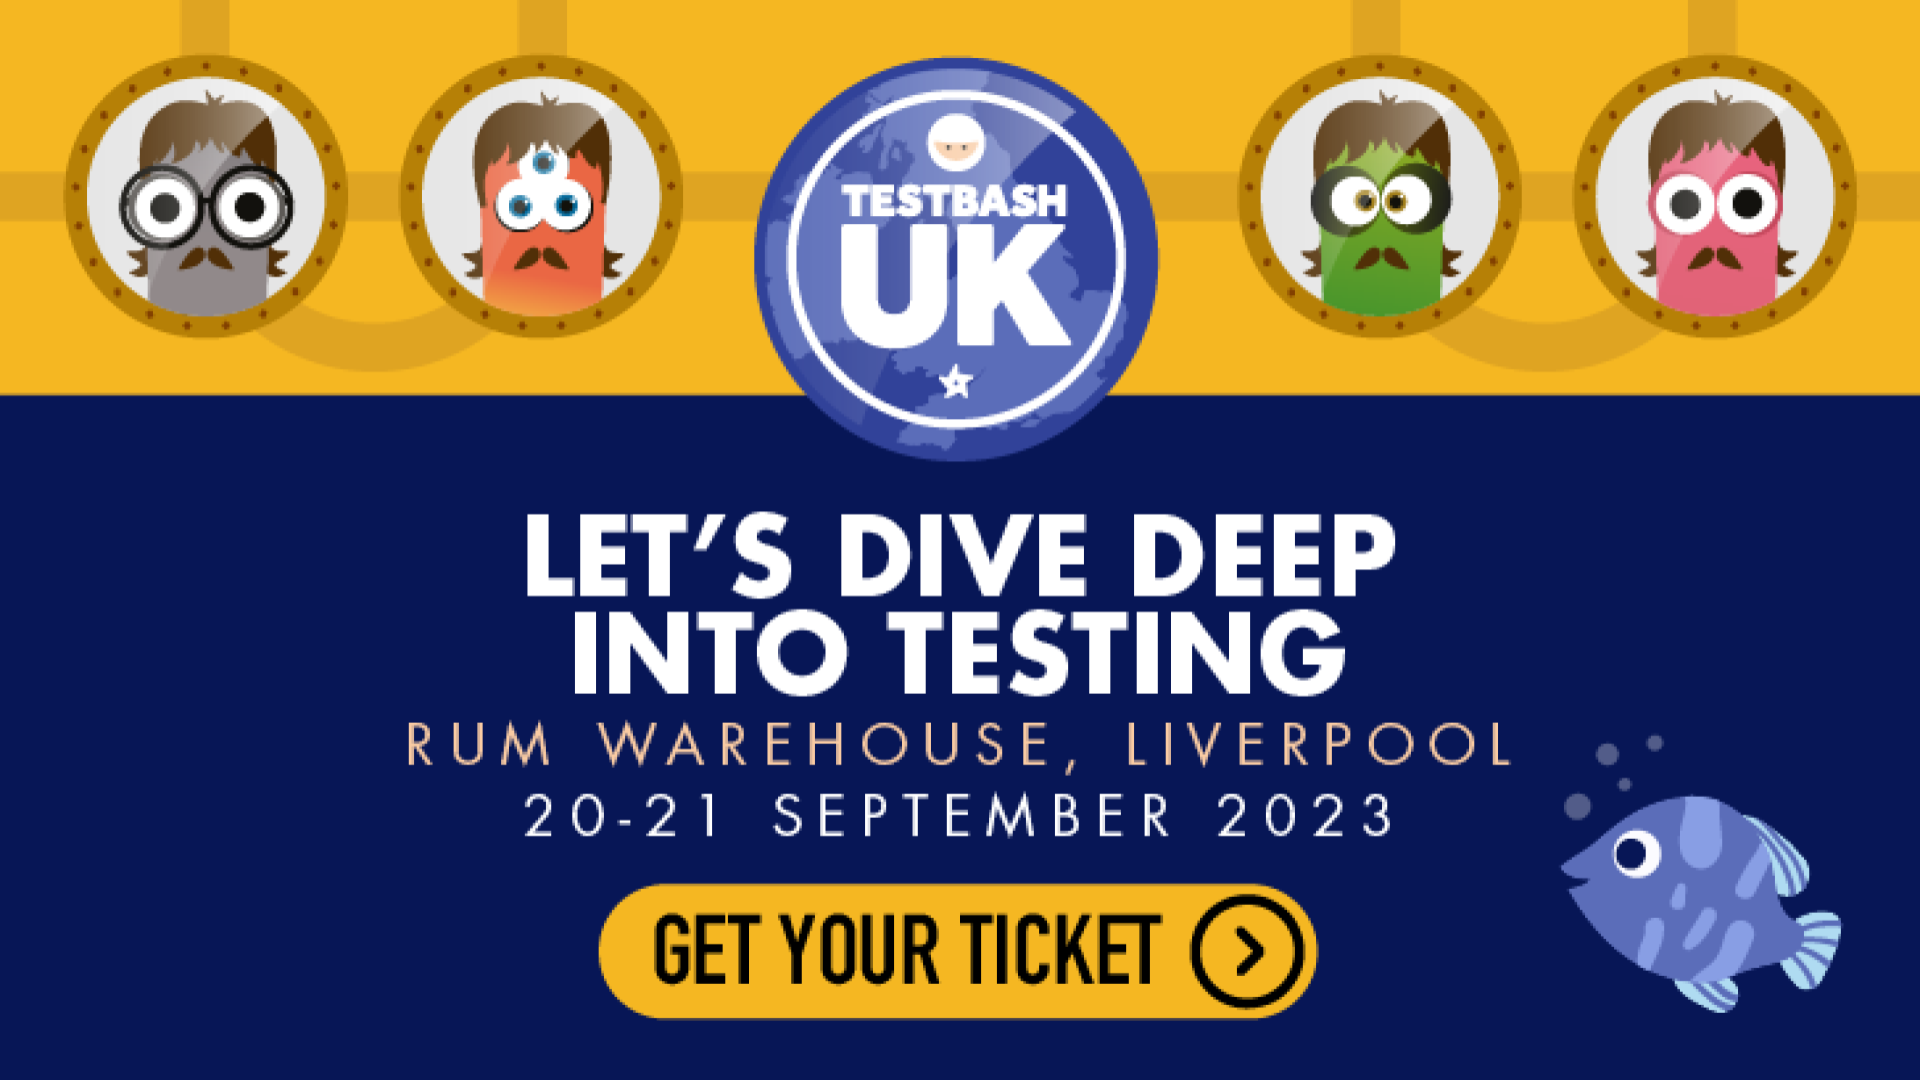 TestBash UK's 99-Minute Workshops Are Now Live!